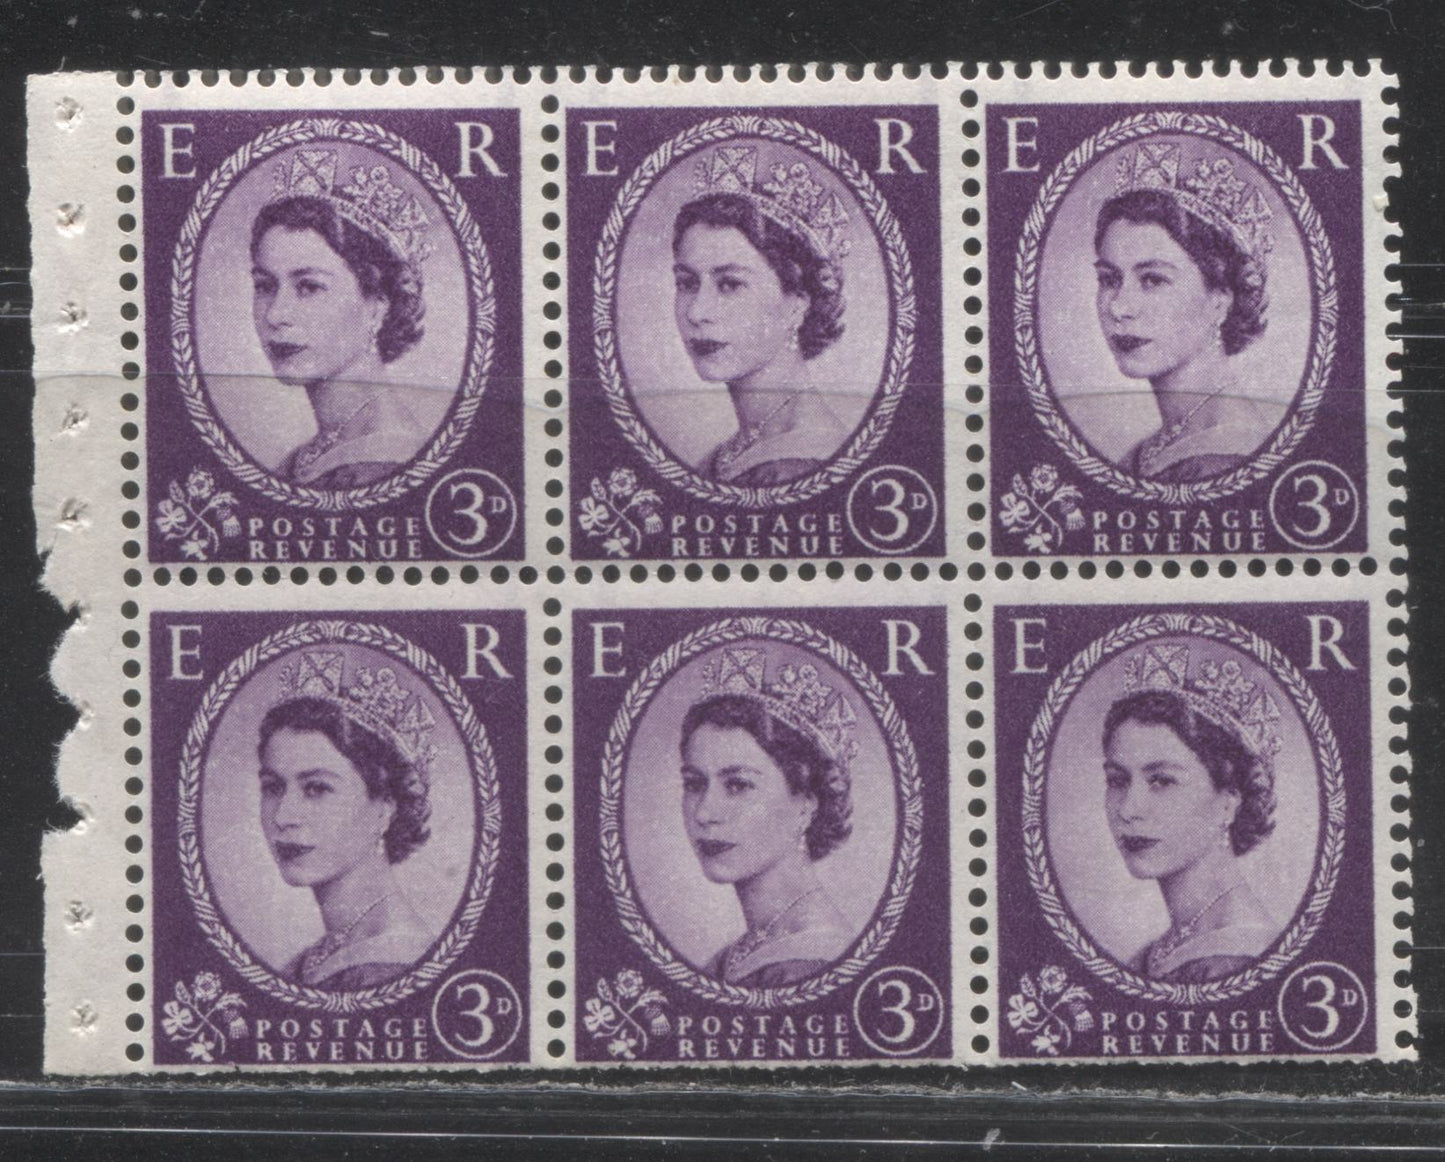 Great Britain SG#L15 4/6d Lavender & Black Cover 1959-1967 Wilding Issue, A Complete Booklet With Inverted Multiple St. Edward's Crown Watermark, Panes of 6, Type C GPO Cypher, April 1959